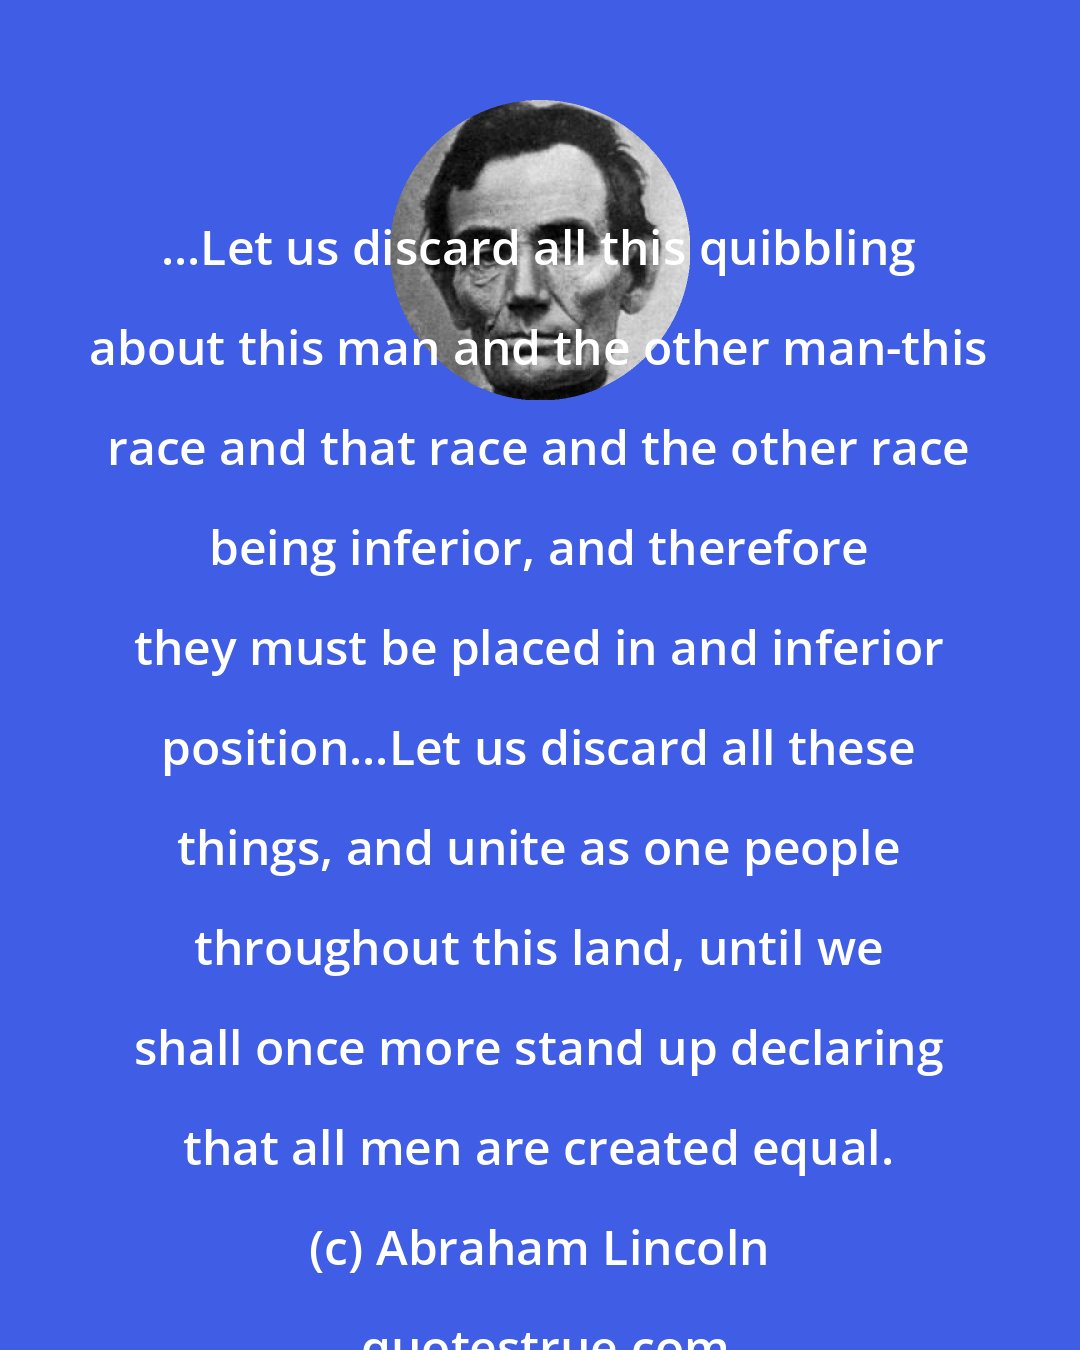 Abraham Lincoln: ...Let us discard all this quibbling about this man and the other man-this race and that race and the other race being inferior, and therefore they must be placed in and inferior position...Let us discard all these things, and unite as one people throughout this land, until we shall once more stand up declaring that all men are created equal.